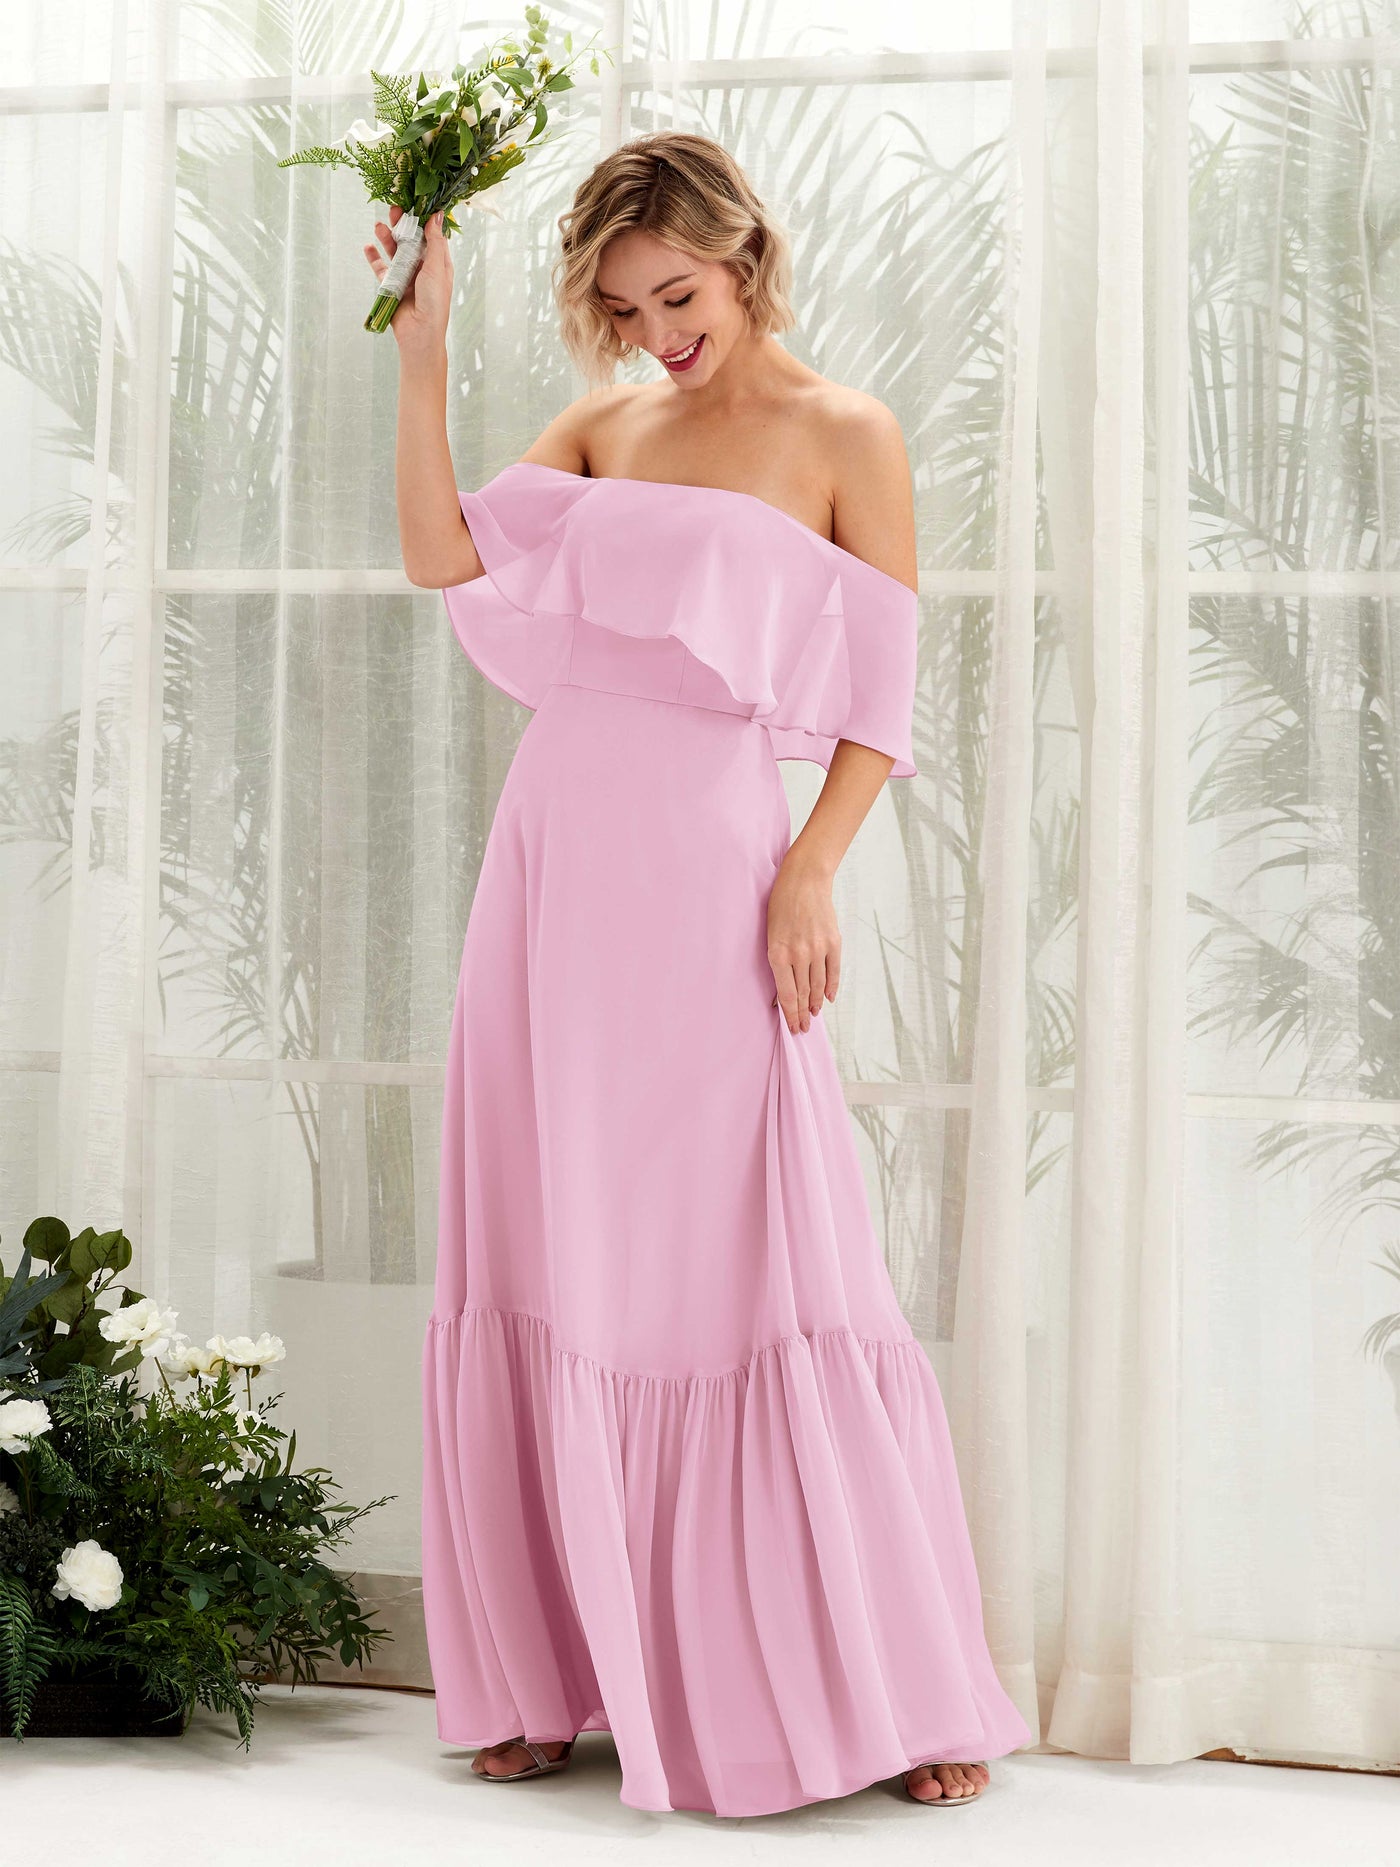 Candy Pink Bridesmaid Dresses Bridesmaid Dress A-line Chiffon Off Shoulder Full Length Sleeveless Wedding Party Dress (81224539)#color_candy-pink